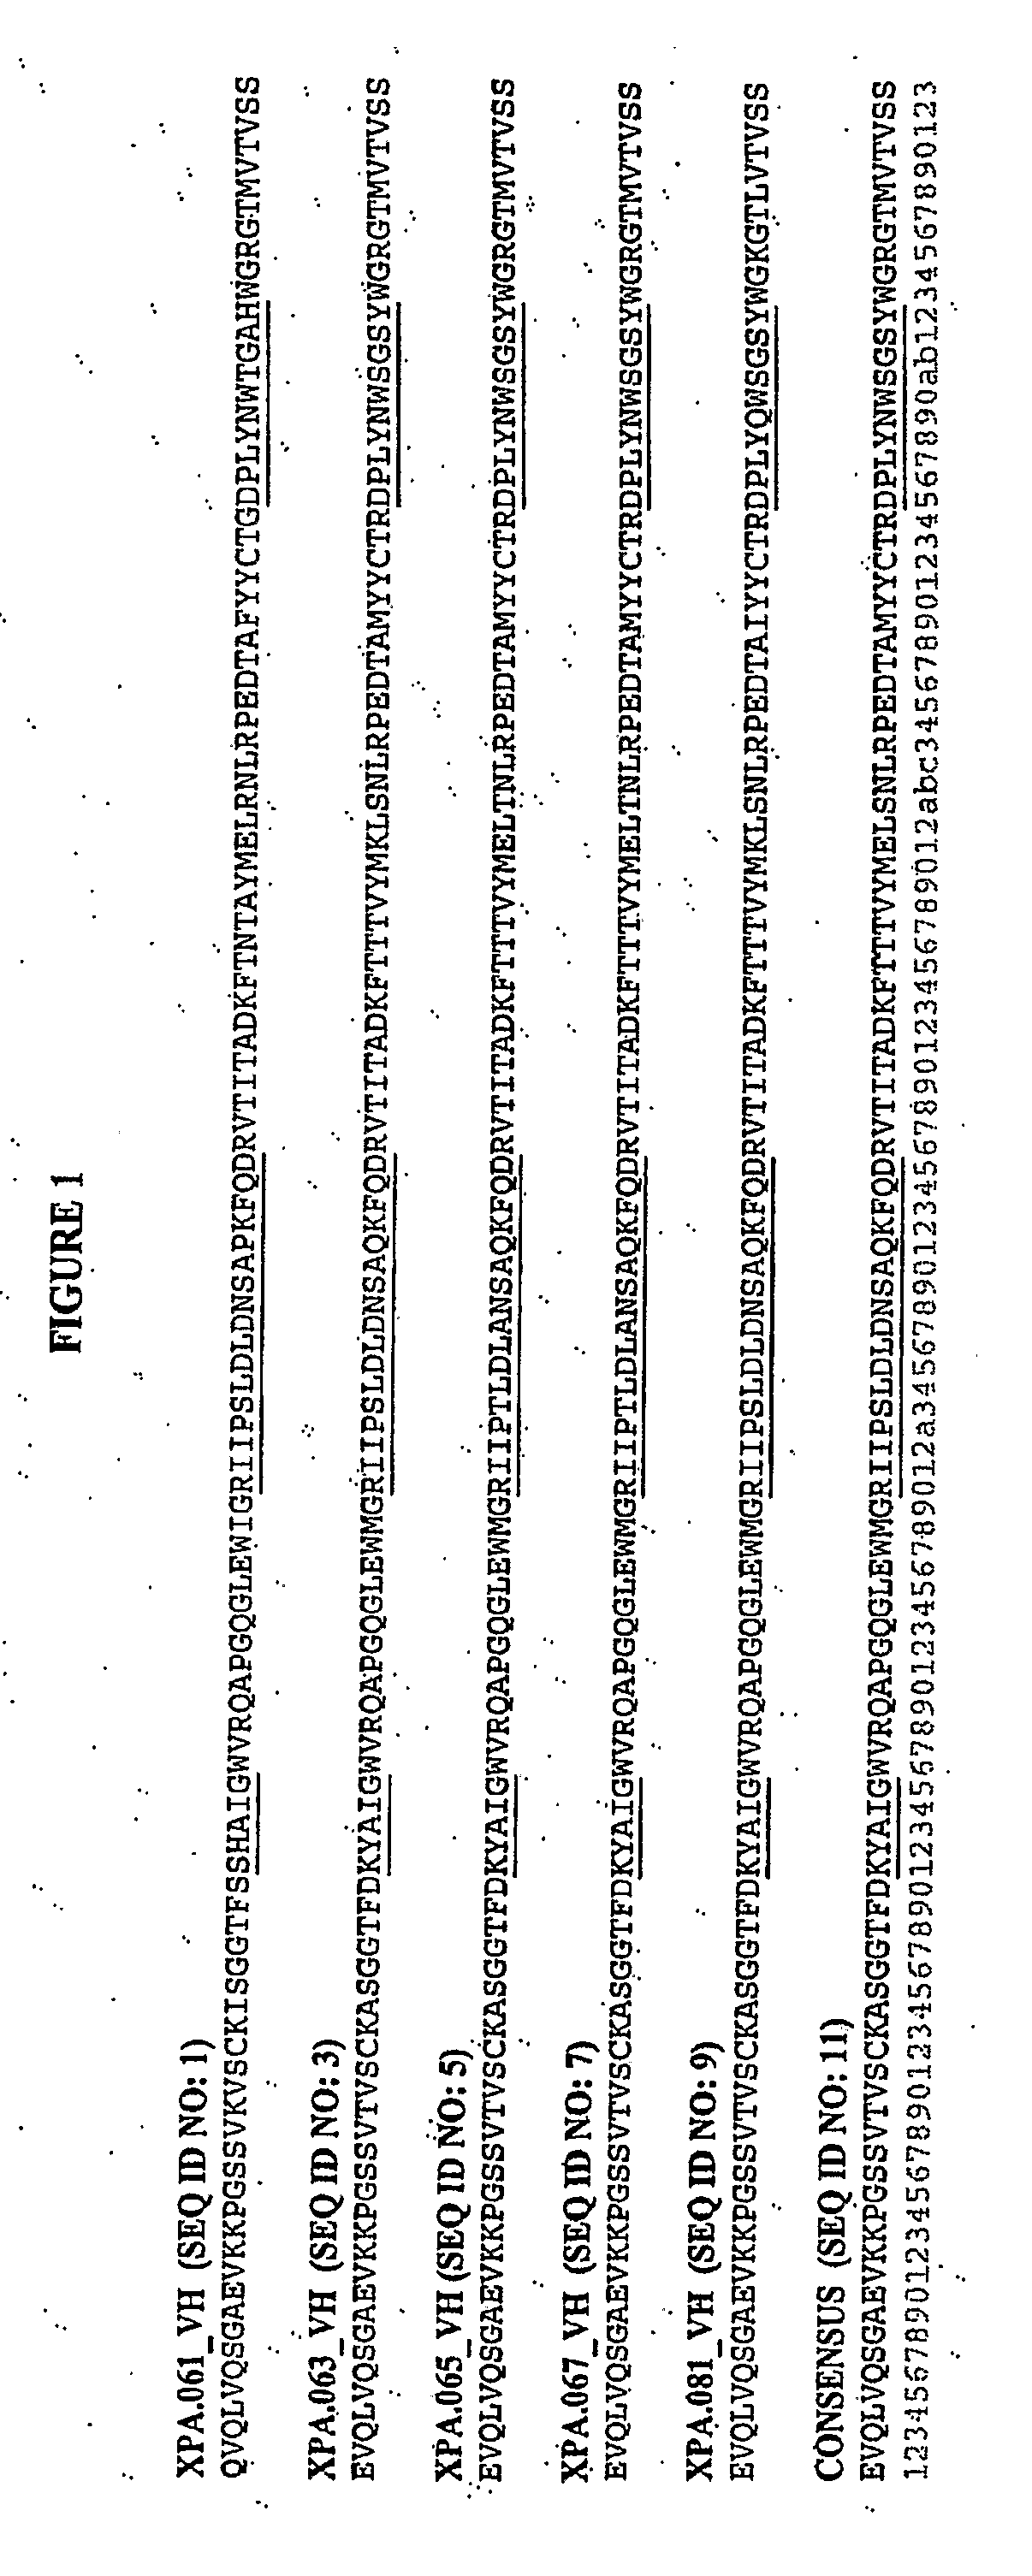 Human antibodies specific for gastrin materials and methods